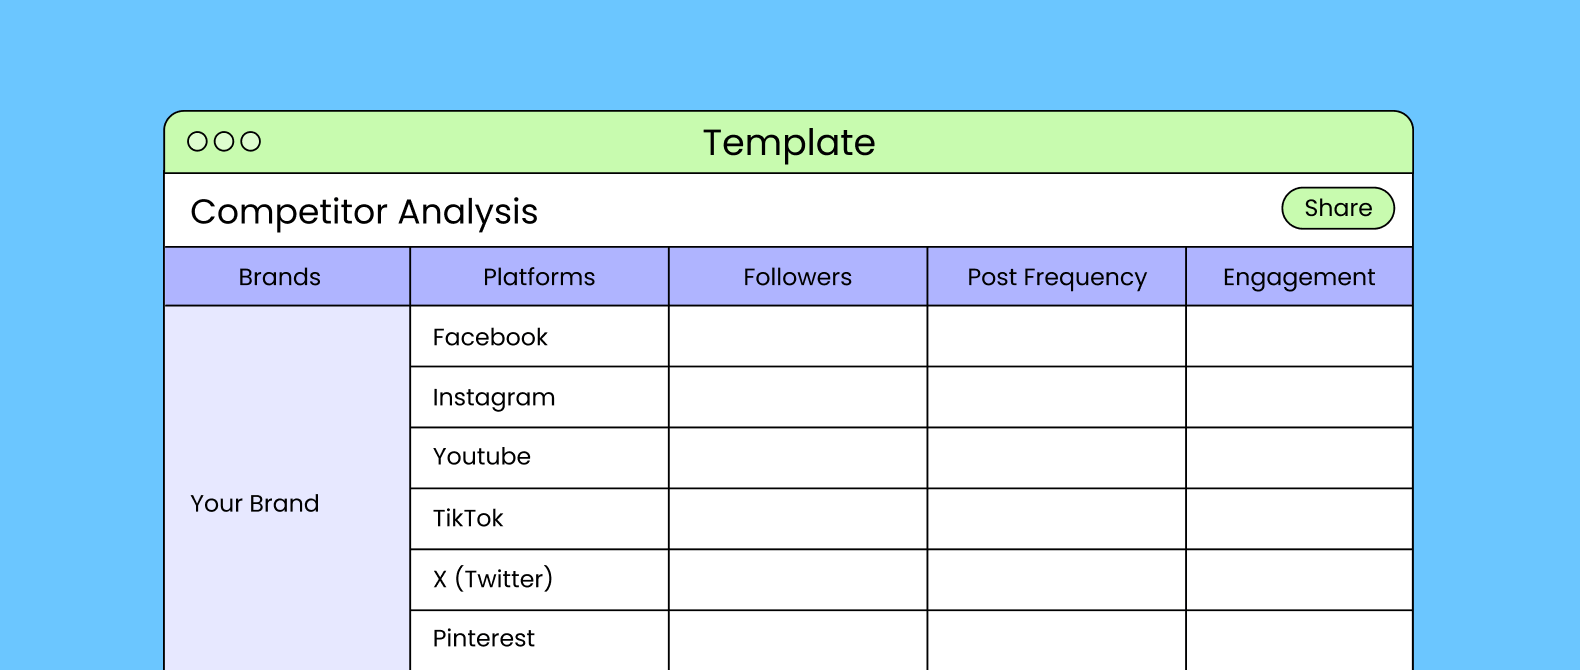 Free Competitor Analysis Template to track all your social media competition